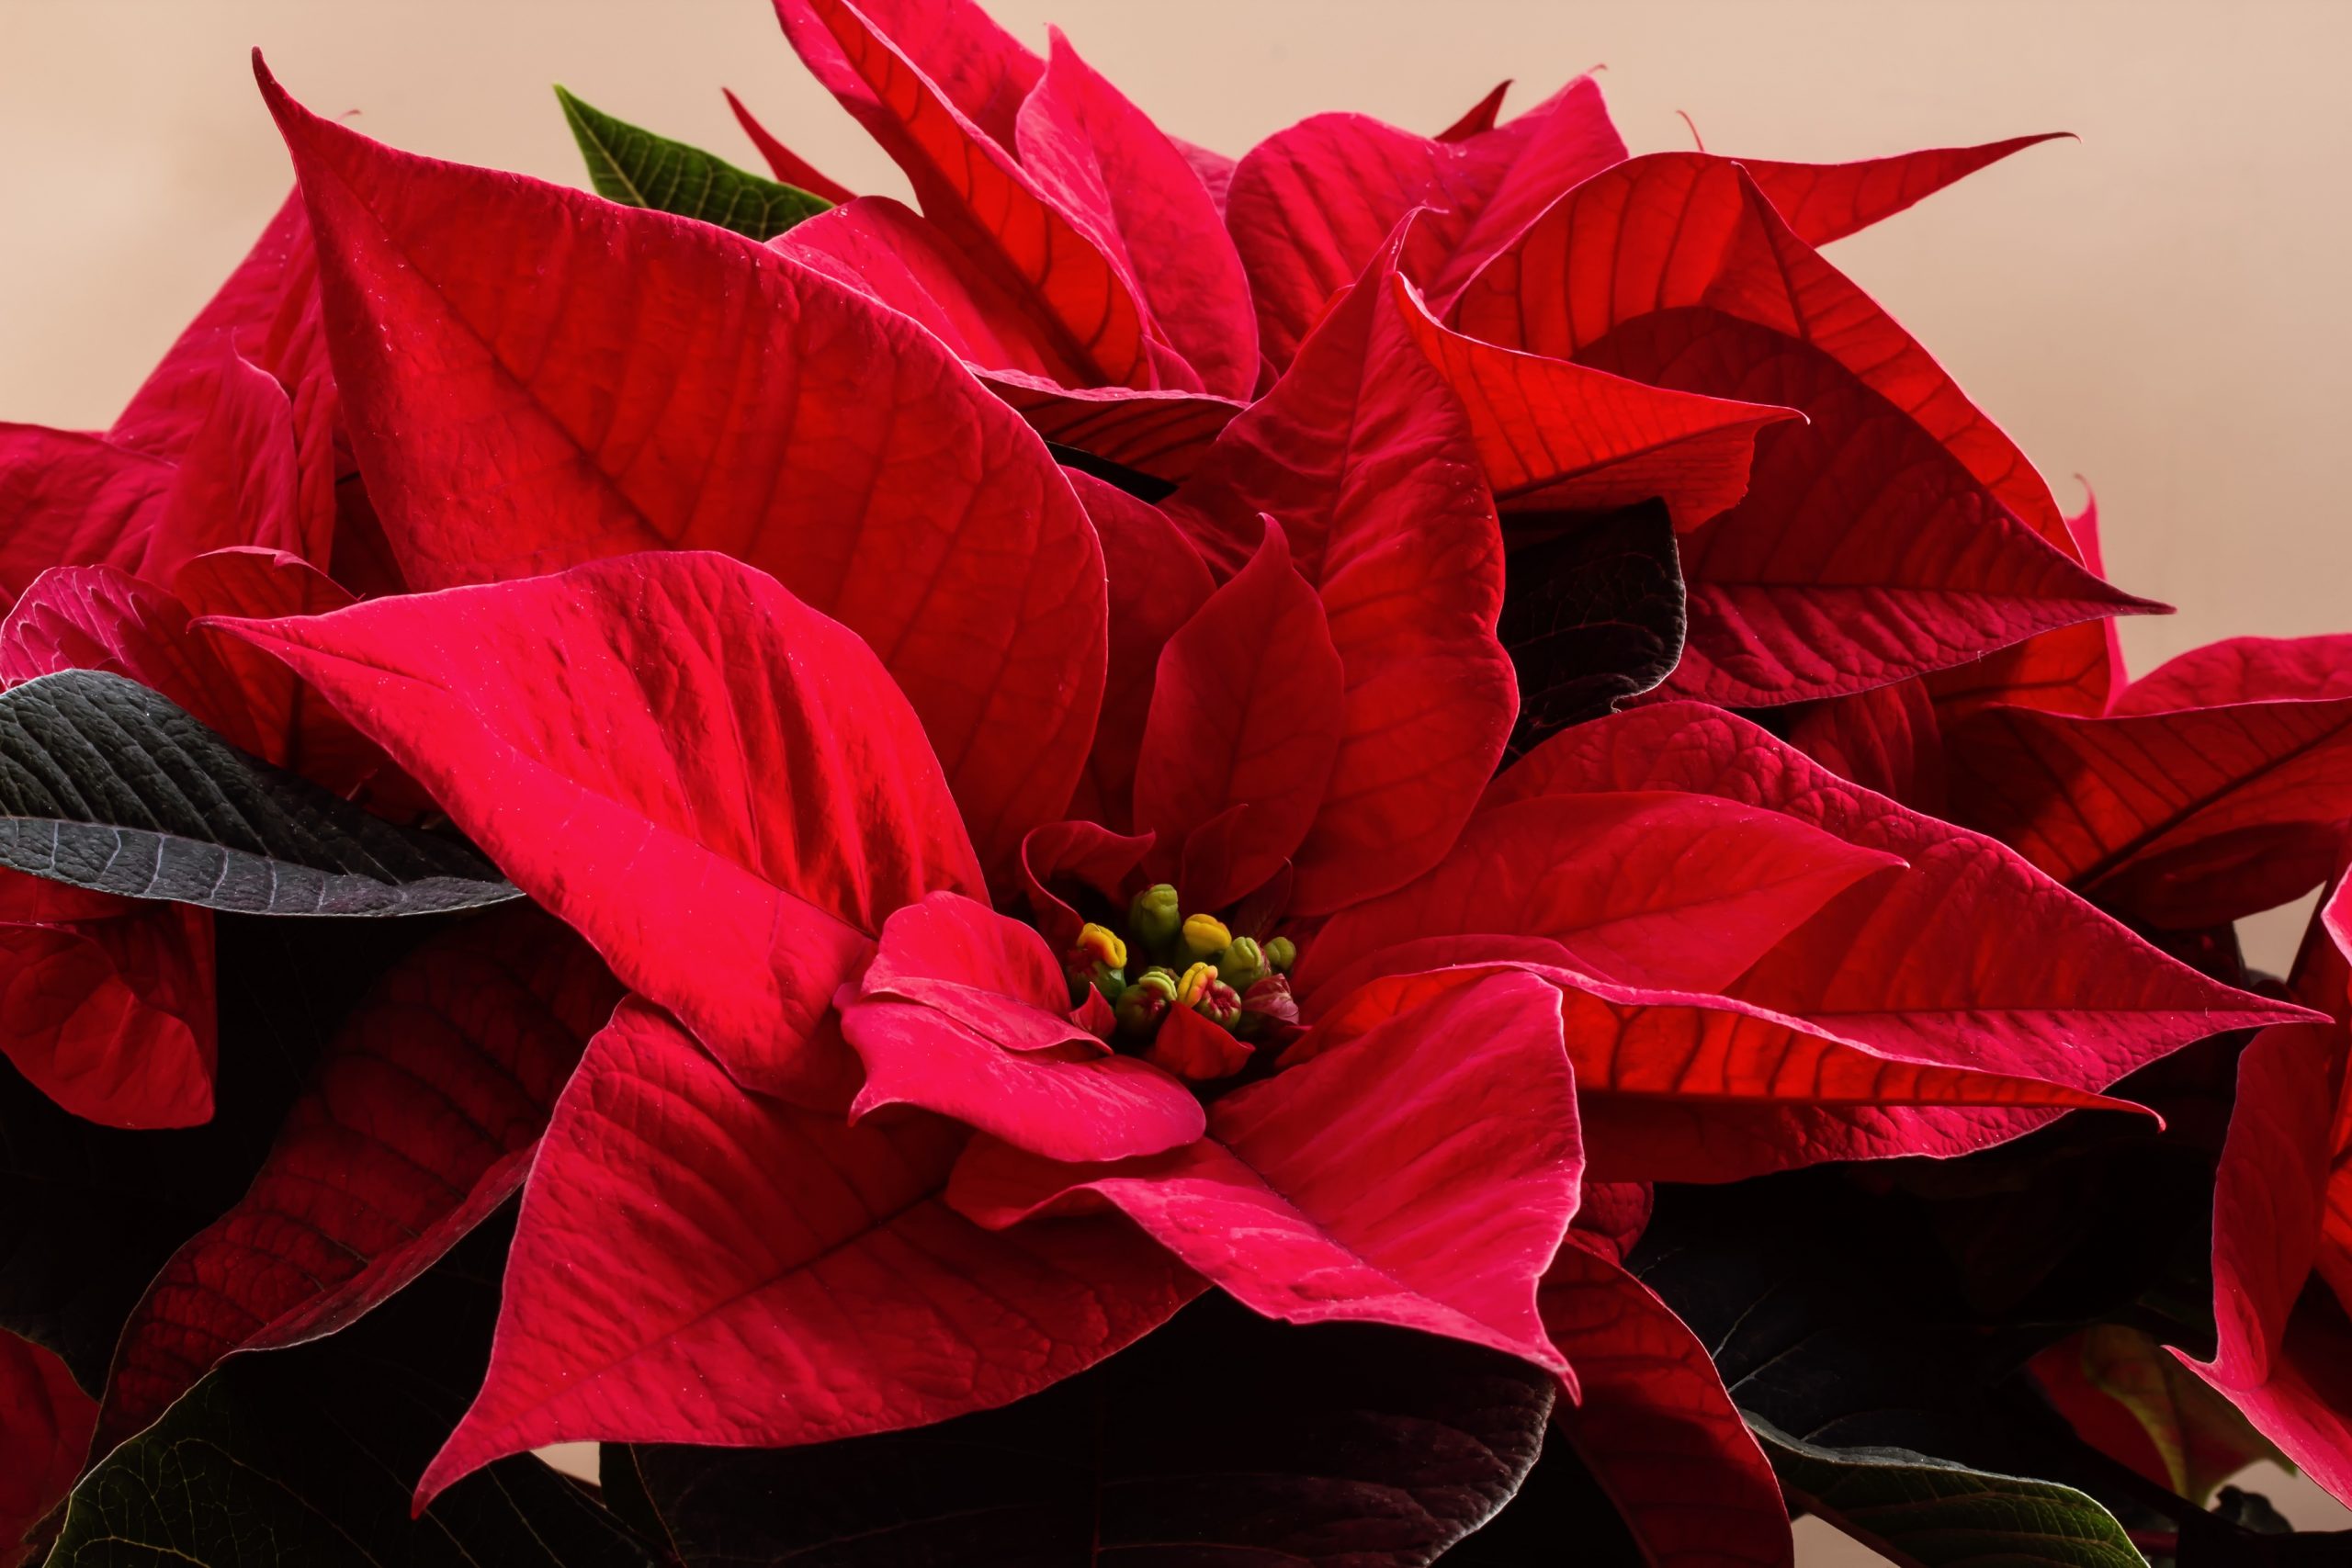 Read more about the article Poinsettia